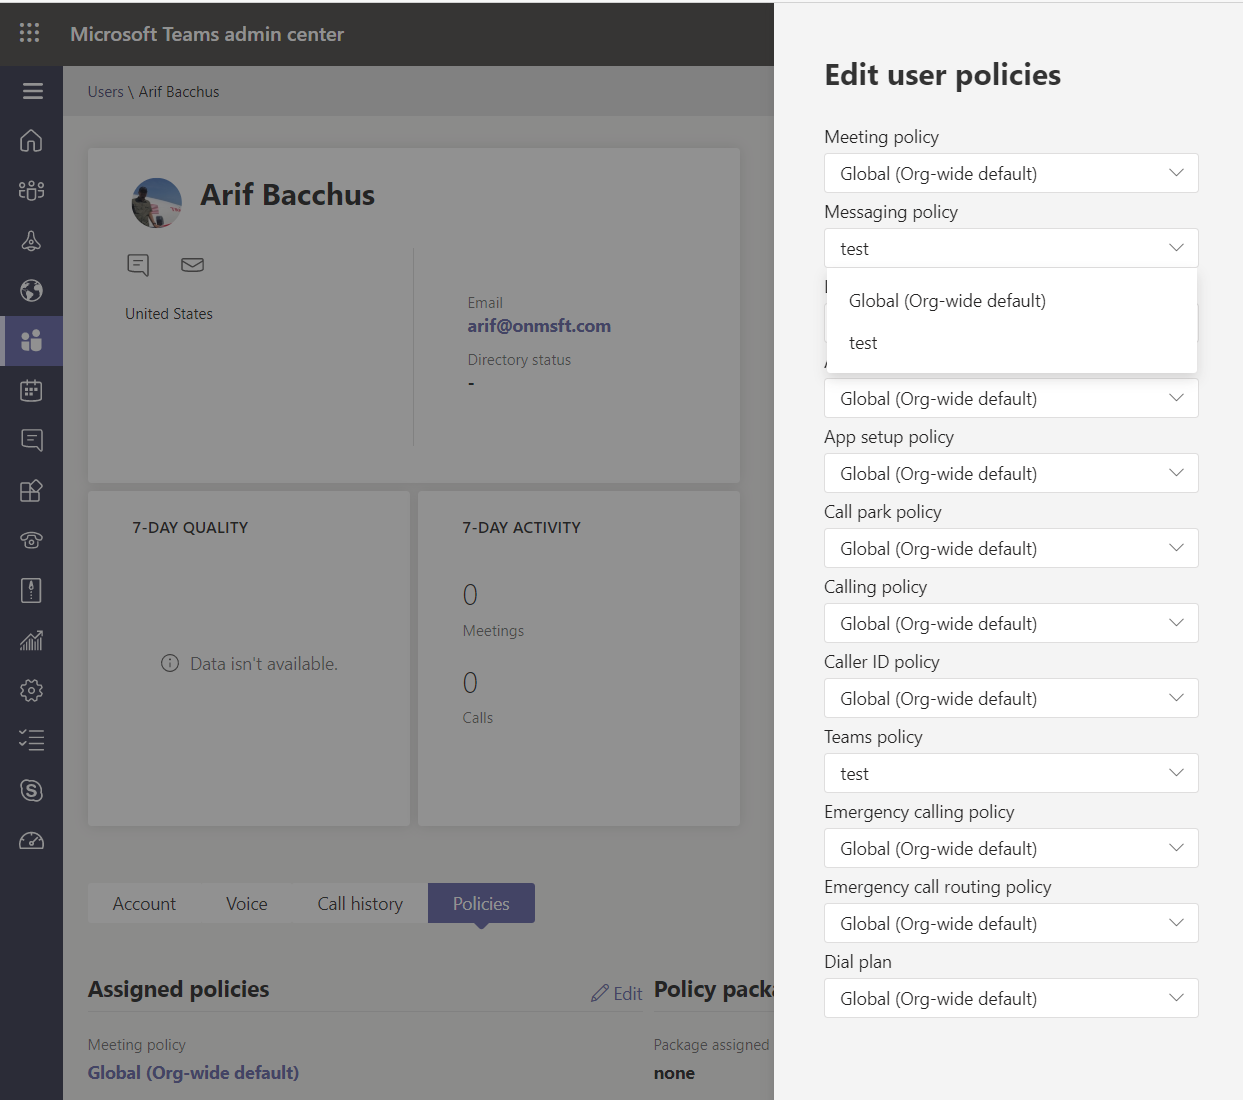 Here's our top 5 tips for setting up Microsoft Teams - OnMSFT.com - April 6, 2020